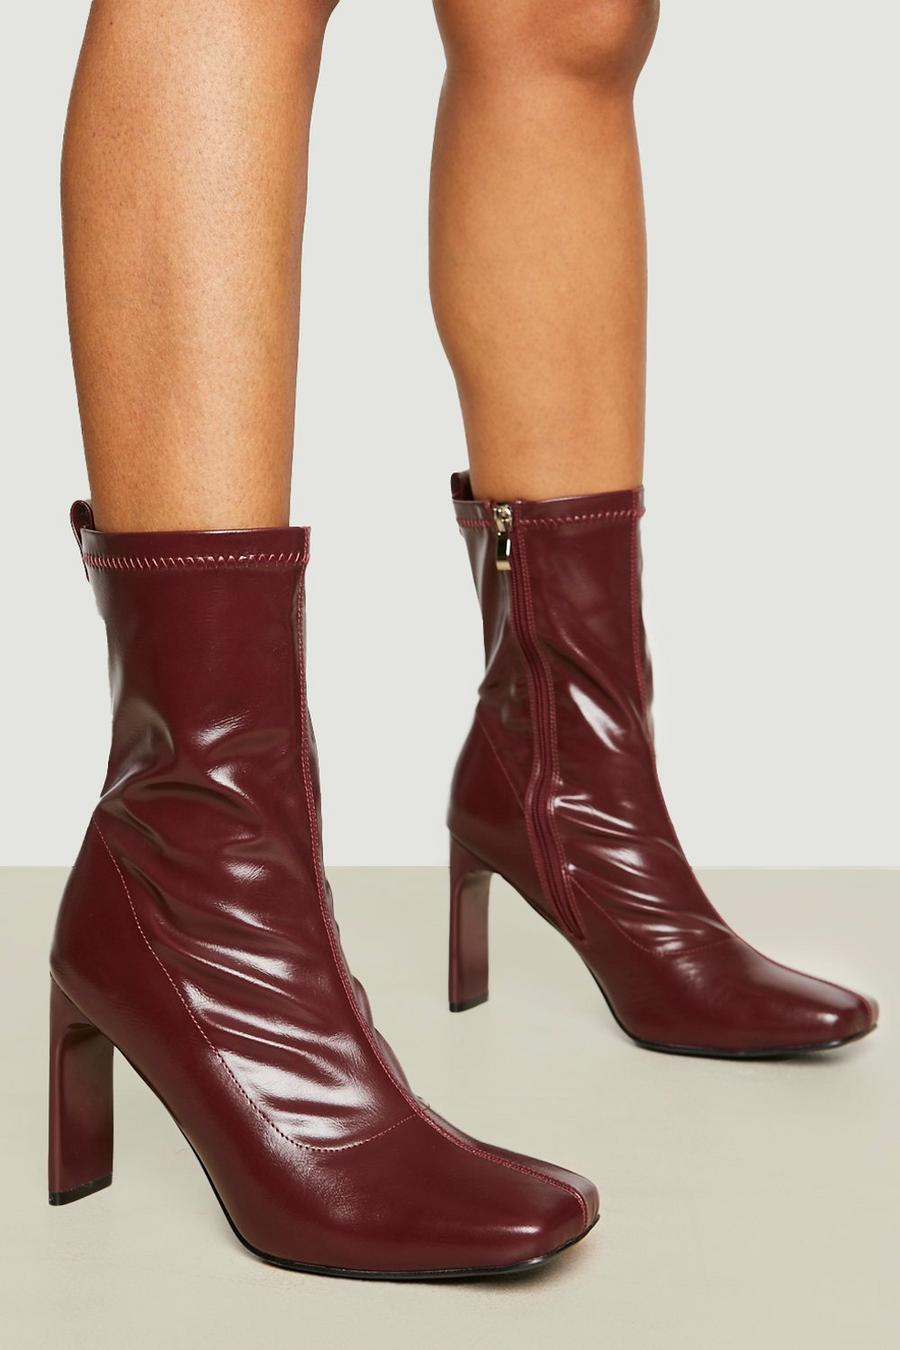 Burgundy red Wide Width Flat Heel Square Toe Sock Boots